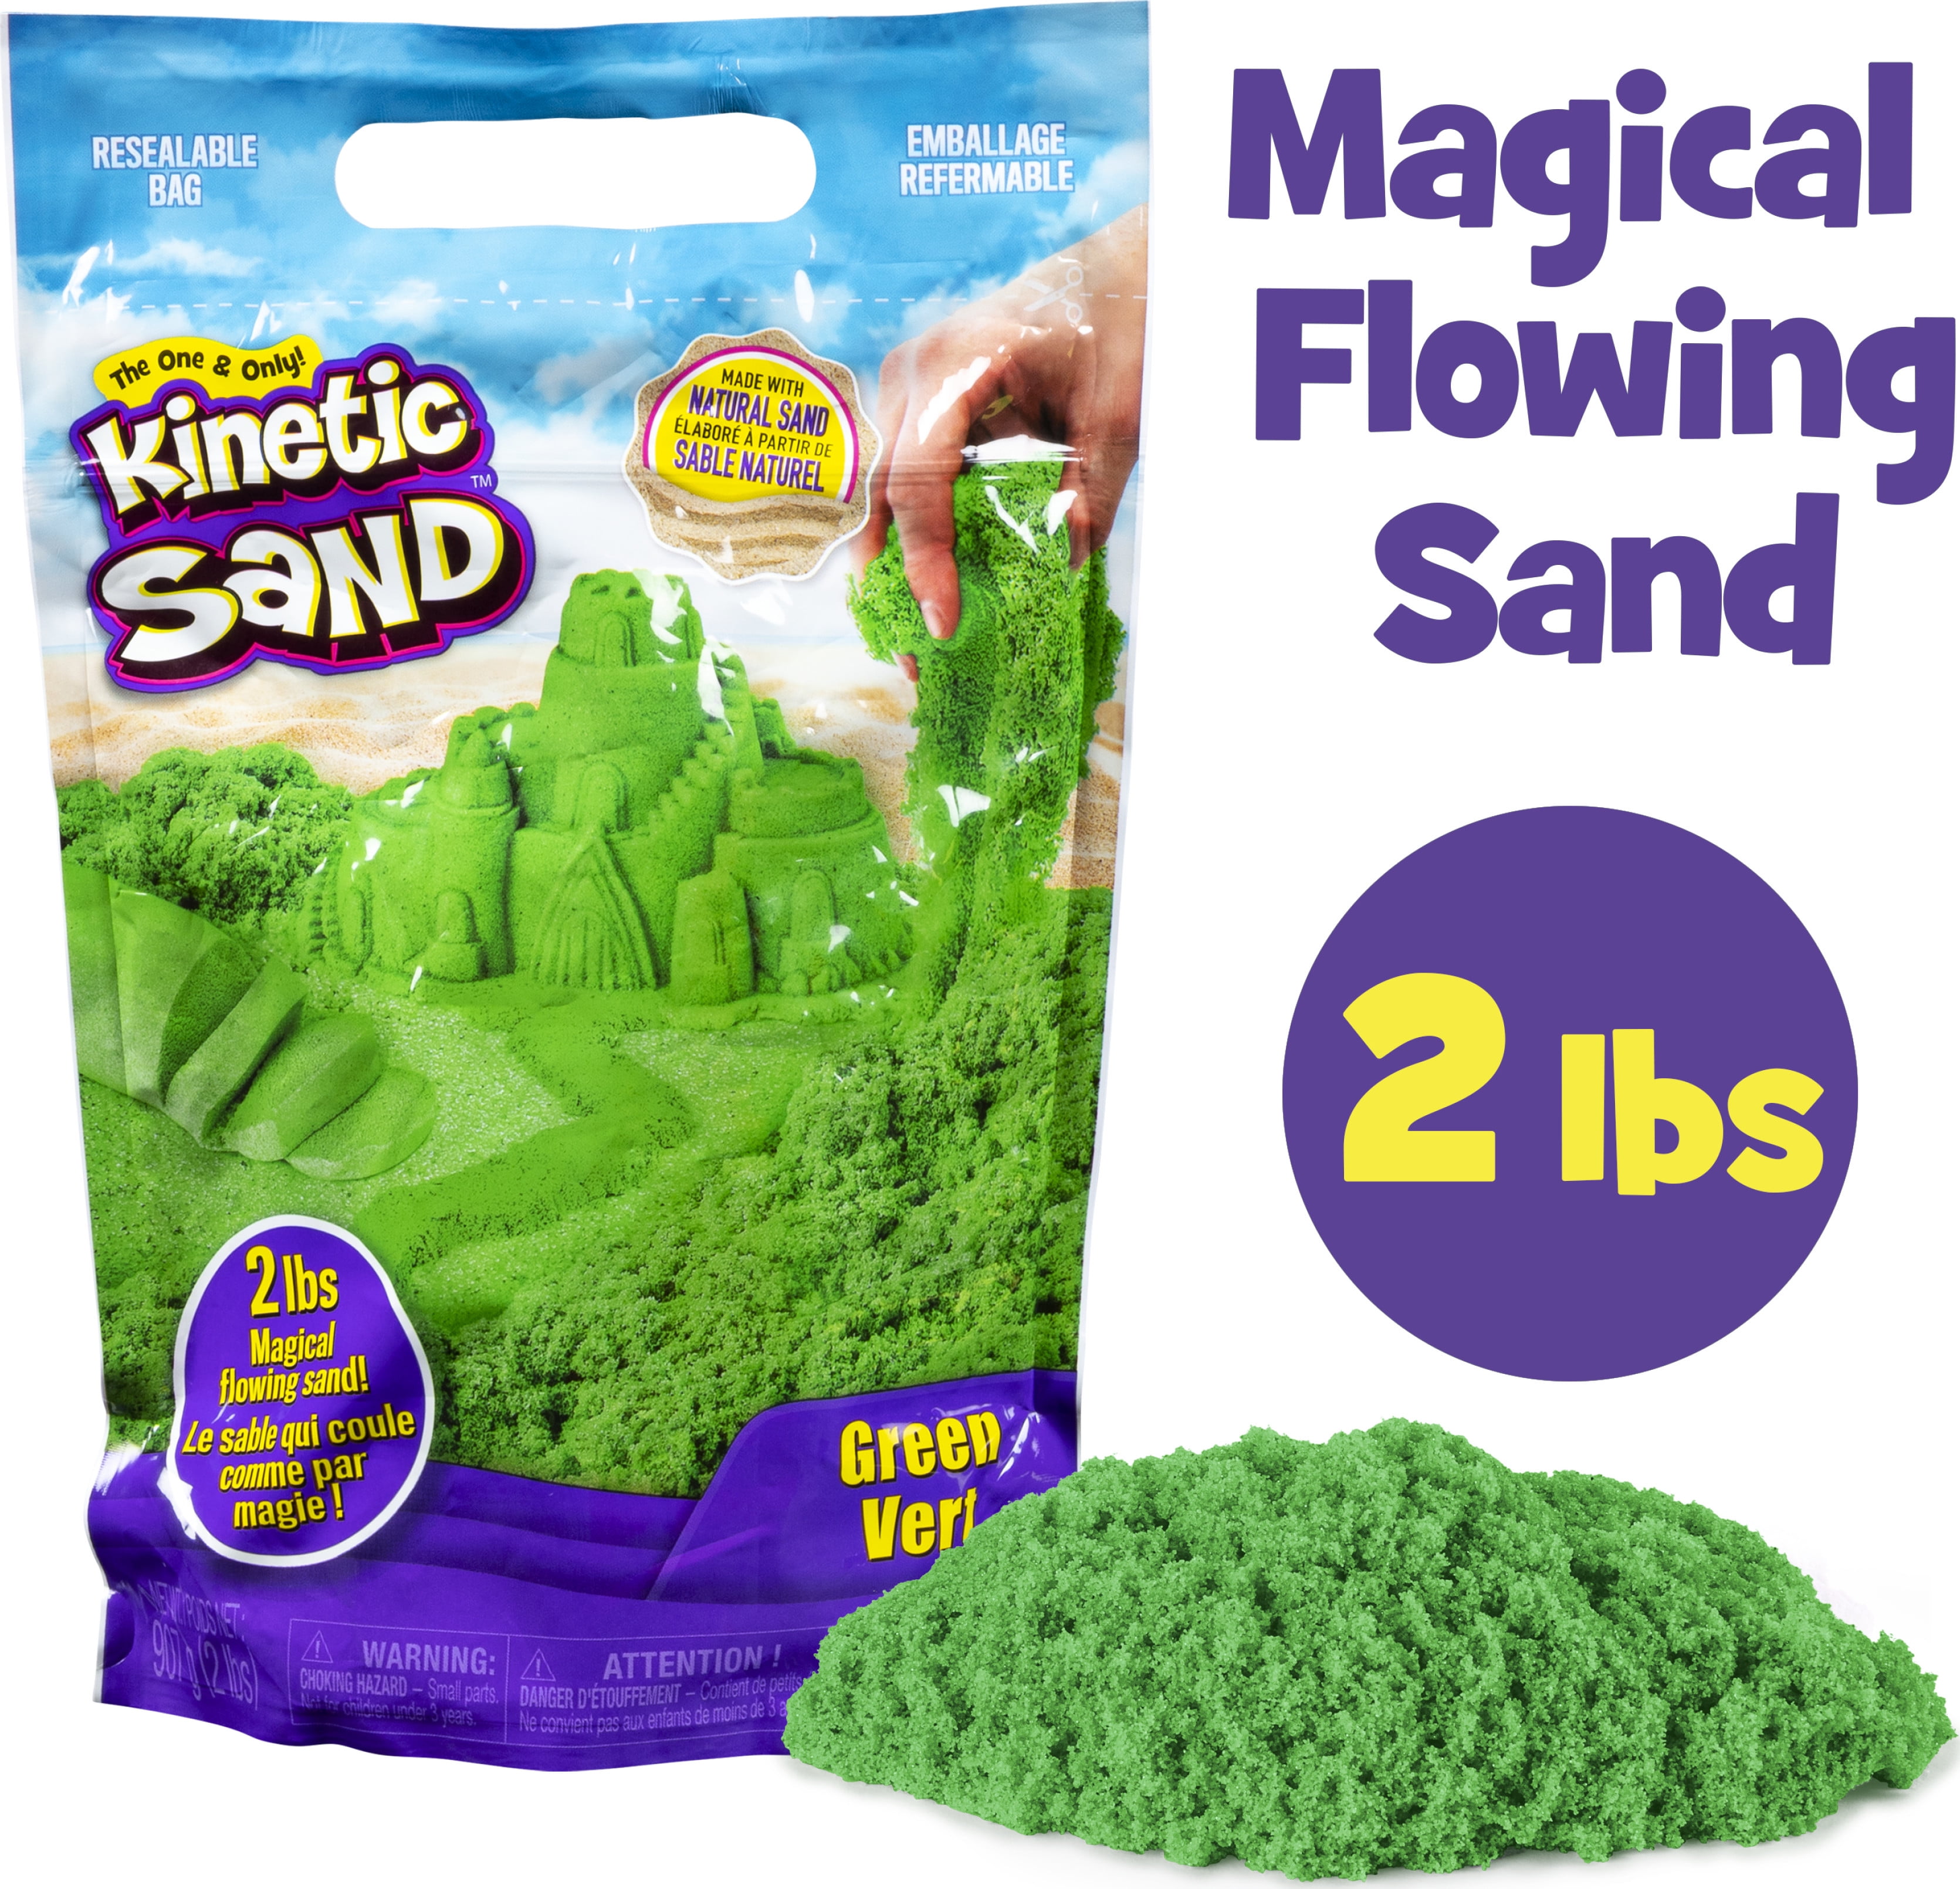 WE-WIN Magic Sand Moldable Indoor Play Sand in Resealable Bag Refill Pack Child Toys